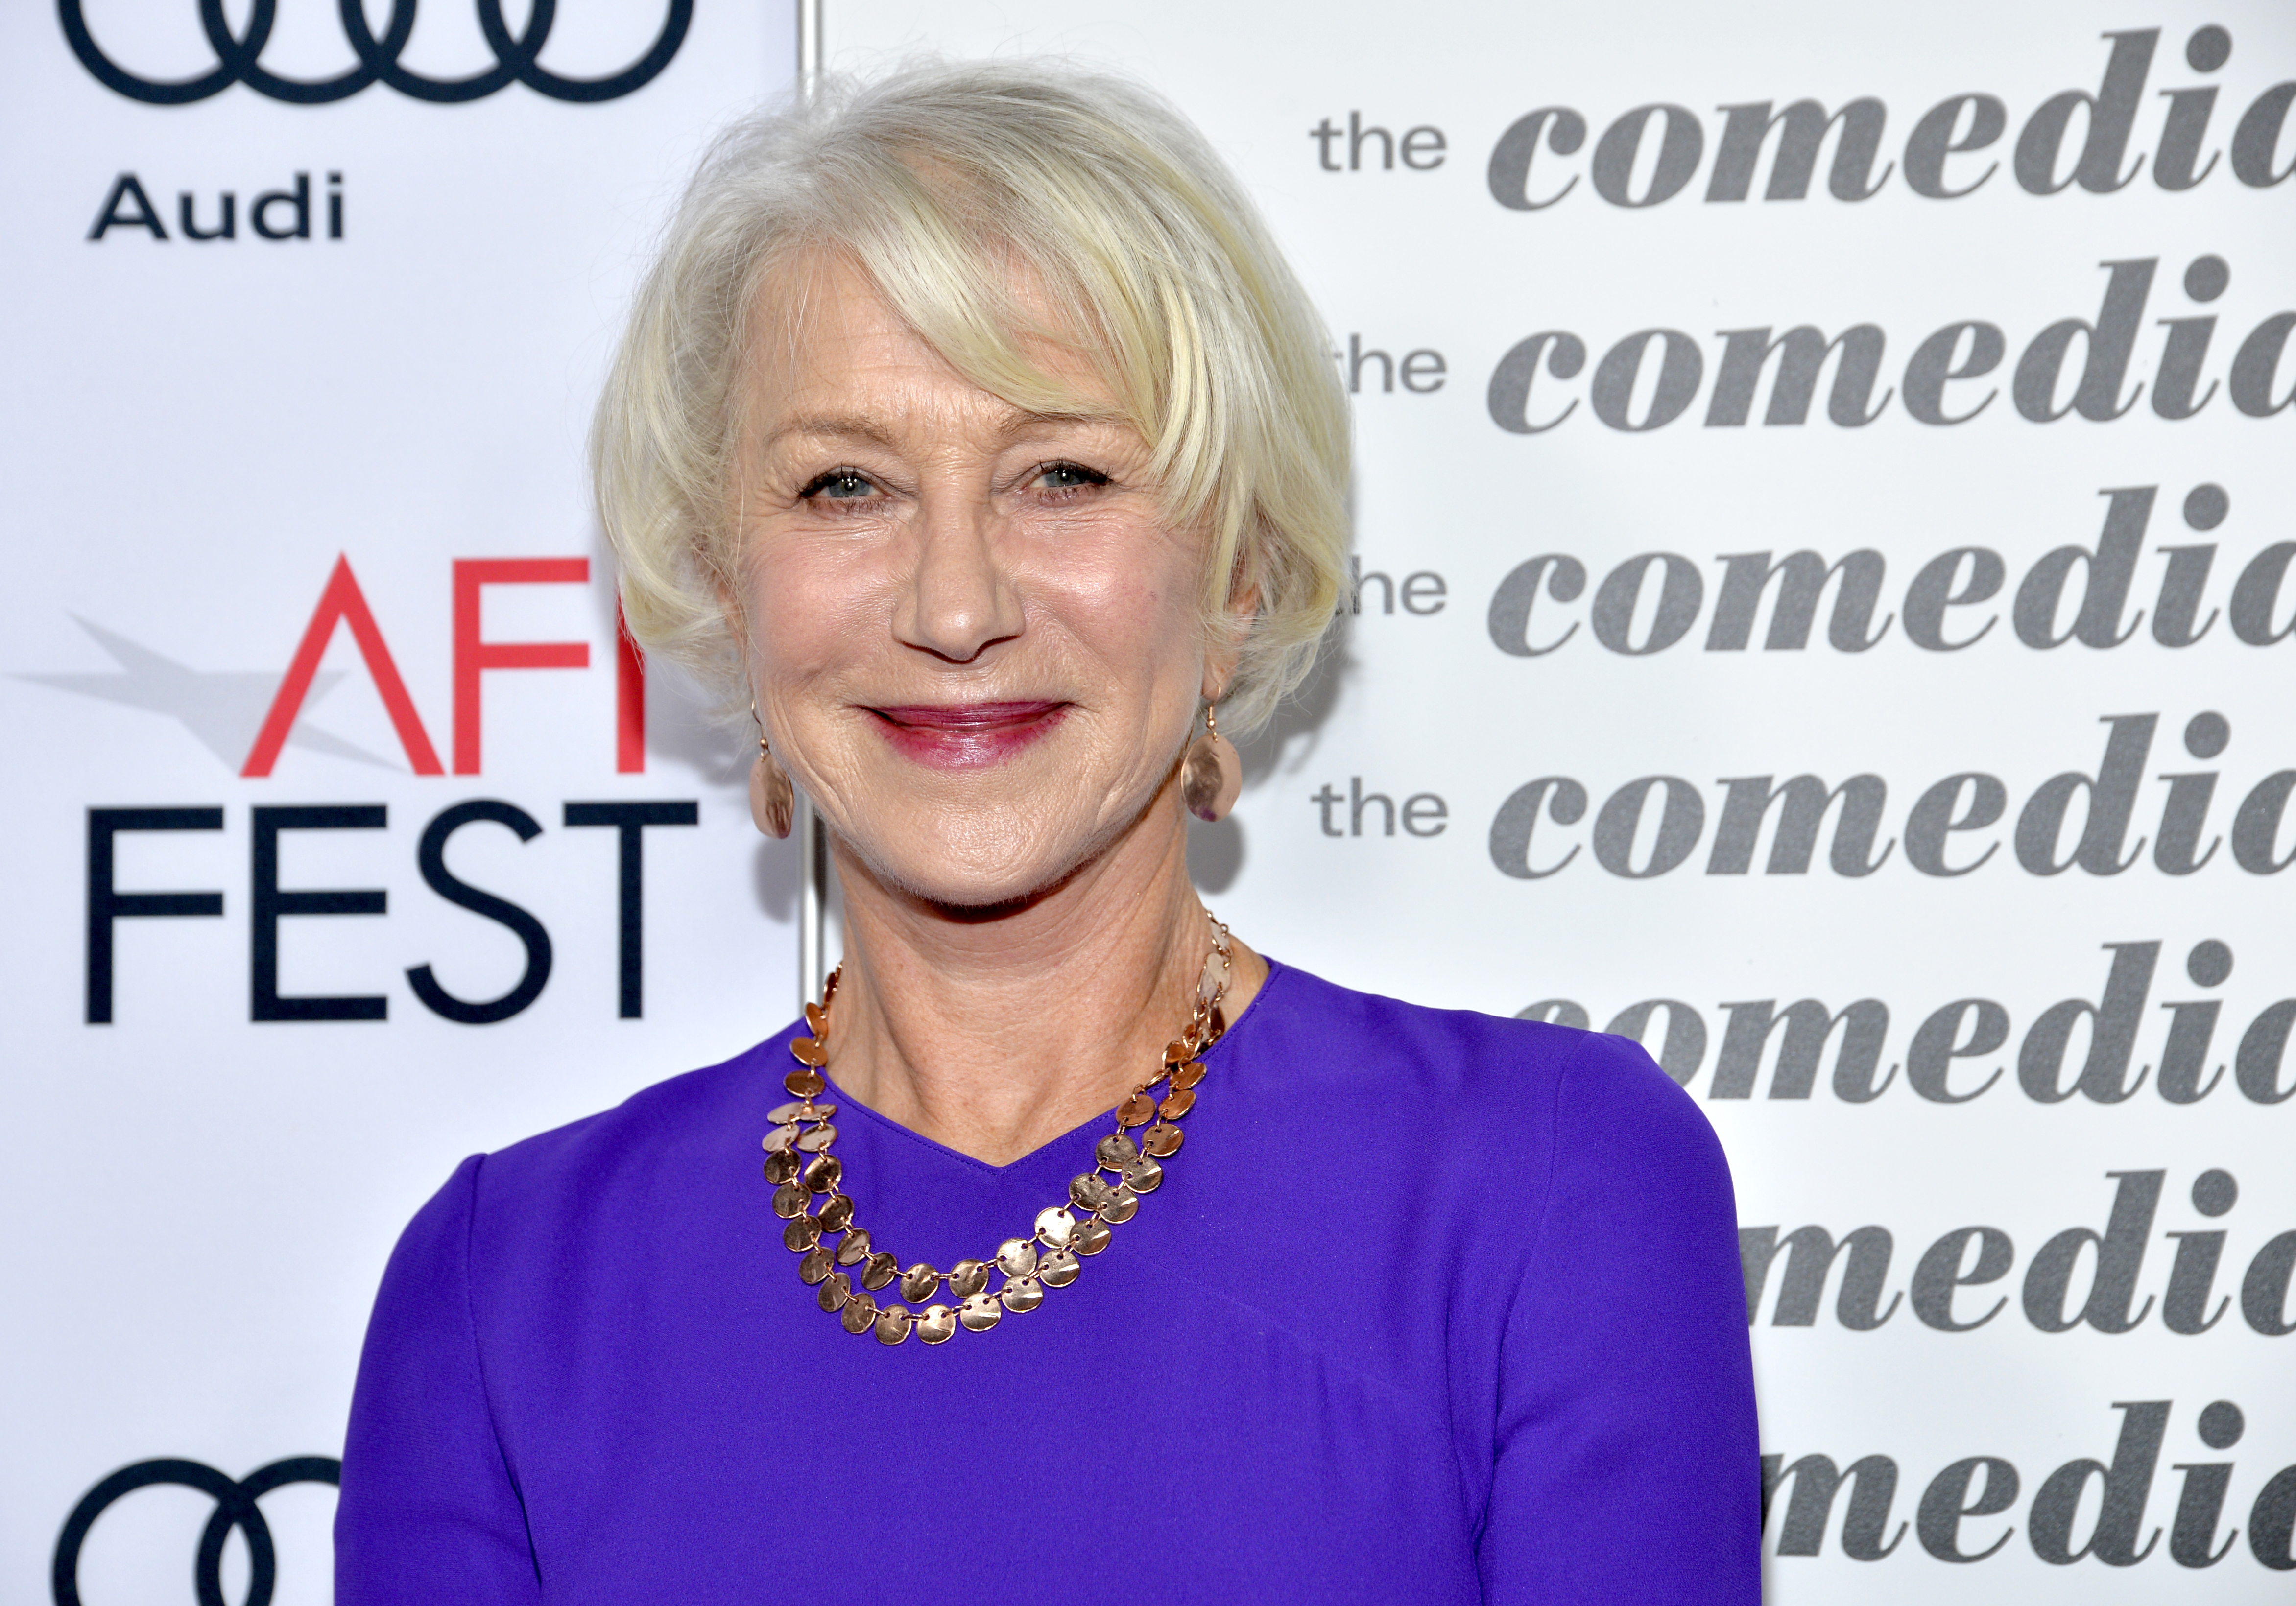 Actress Helen Mirren attends the premiere of Sony Pictures Classics' 'The Comedian' at AFI Fest 2016, presented by Audi at the Egyptian Theatre on November 11, 2016 in Hollywood, California. (Tara Ziemba—Getty Images)